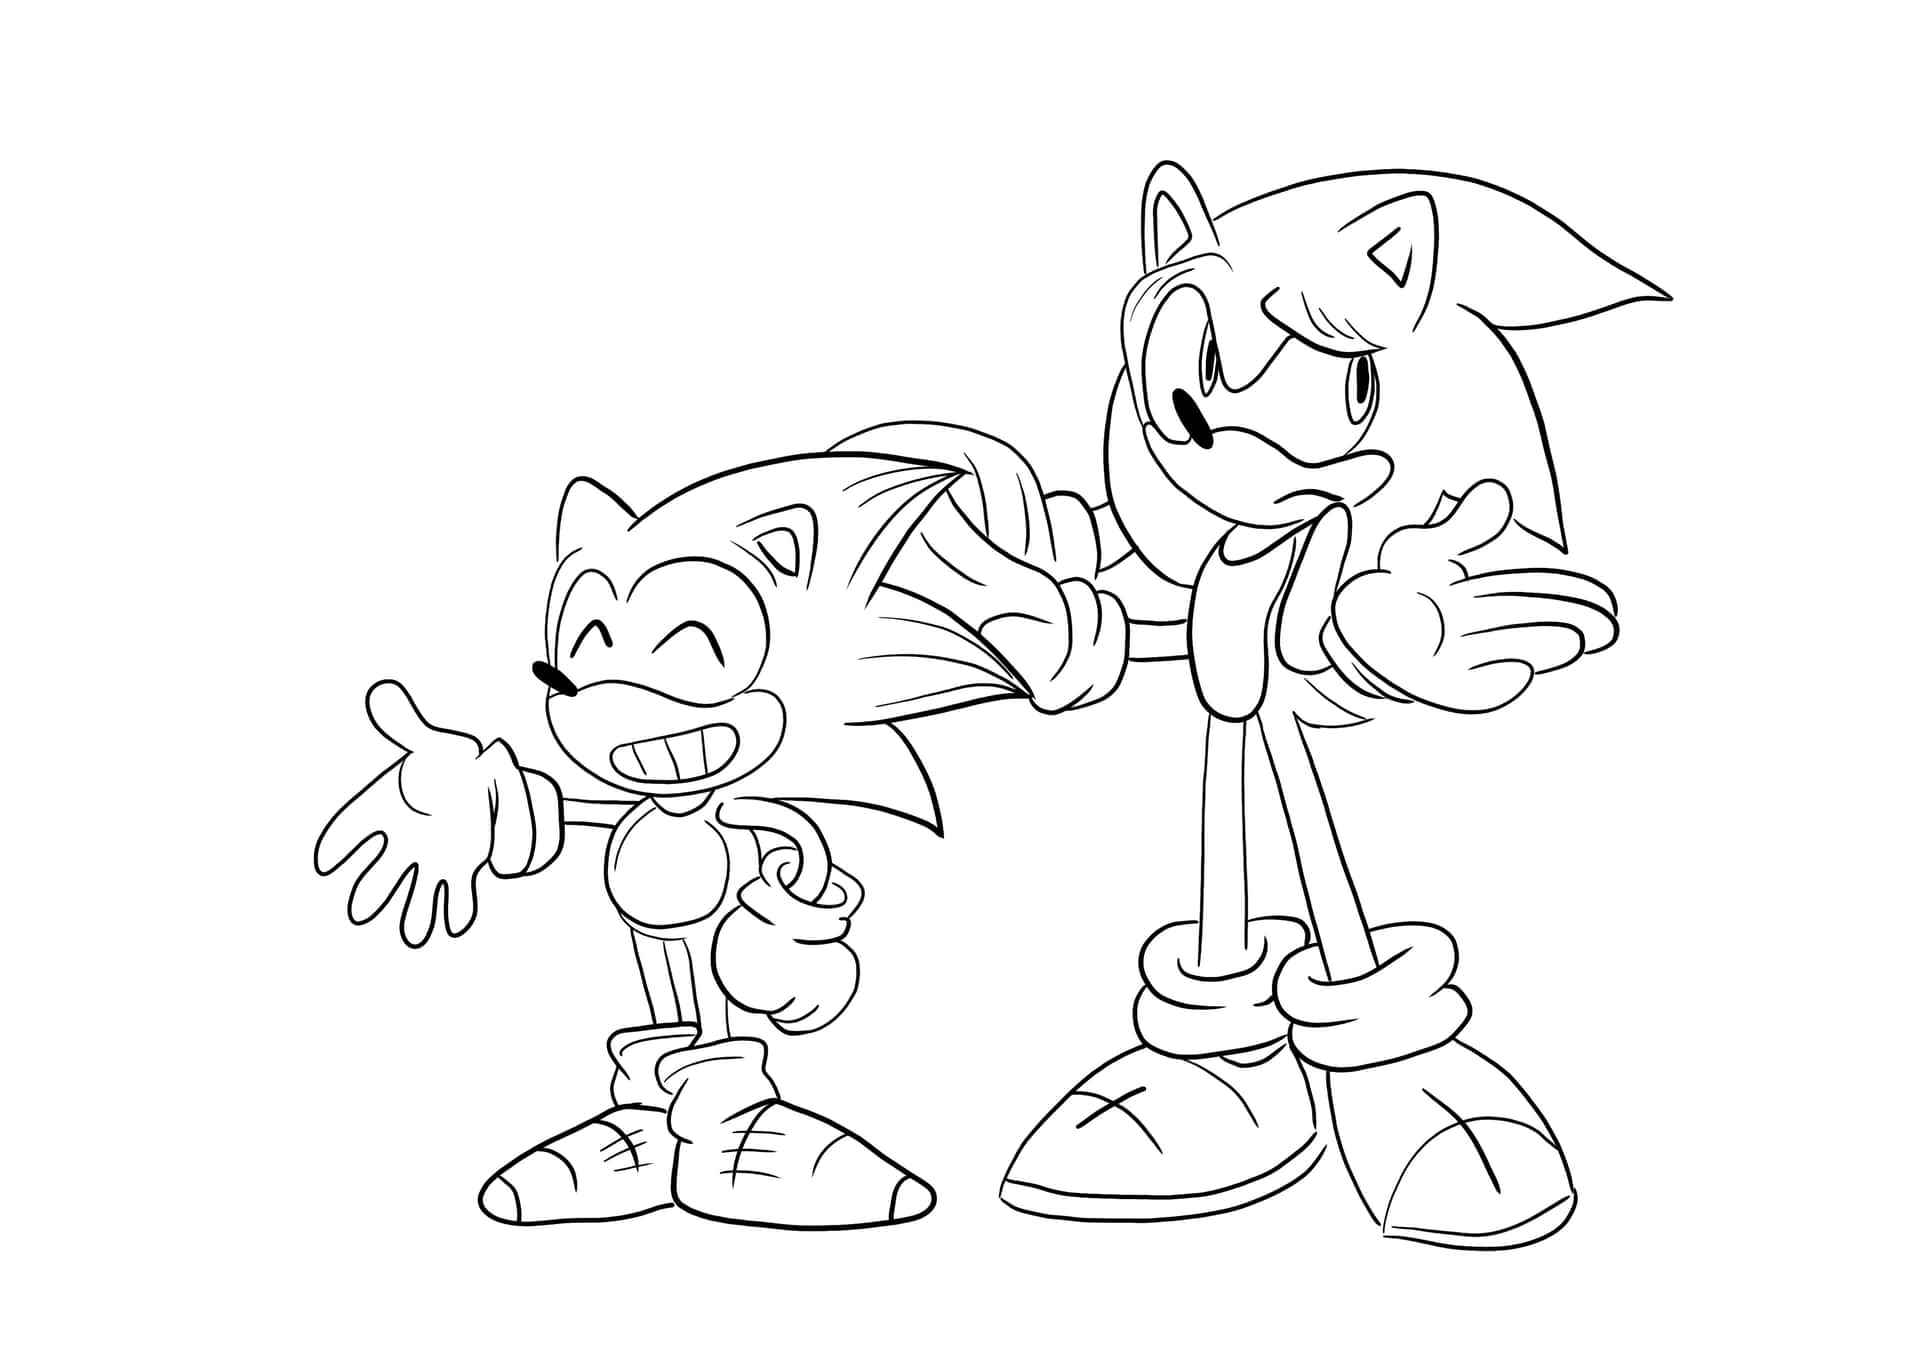 Dark Sonic Coloring Page. The following is our collection of Sonic